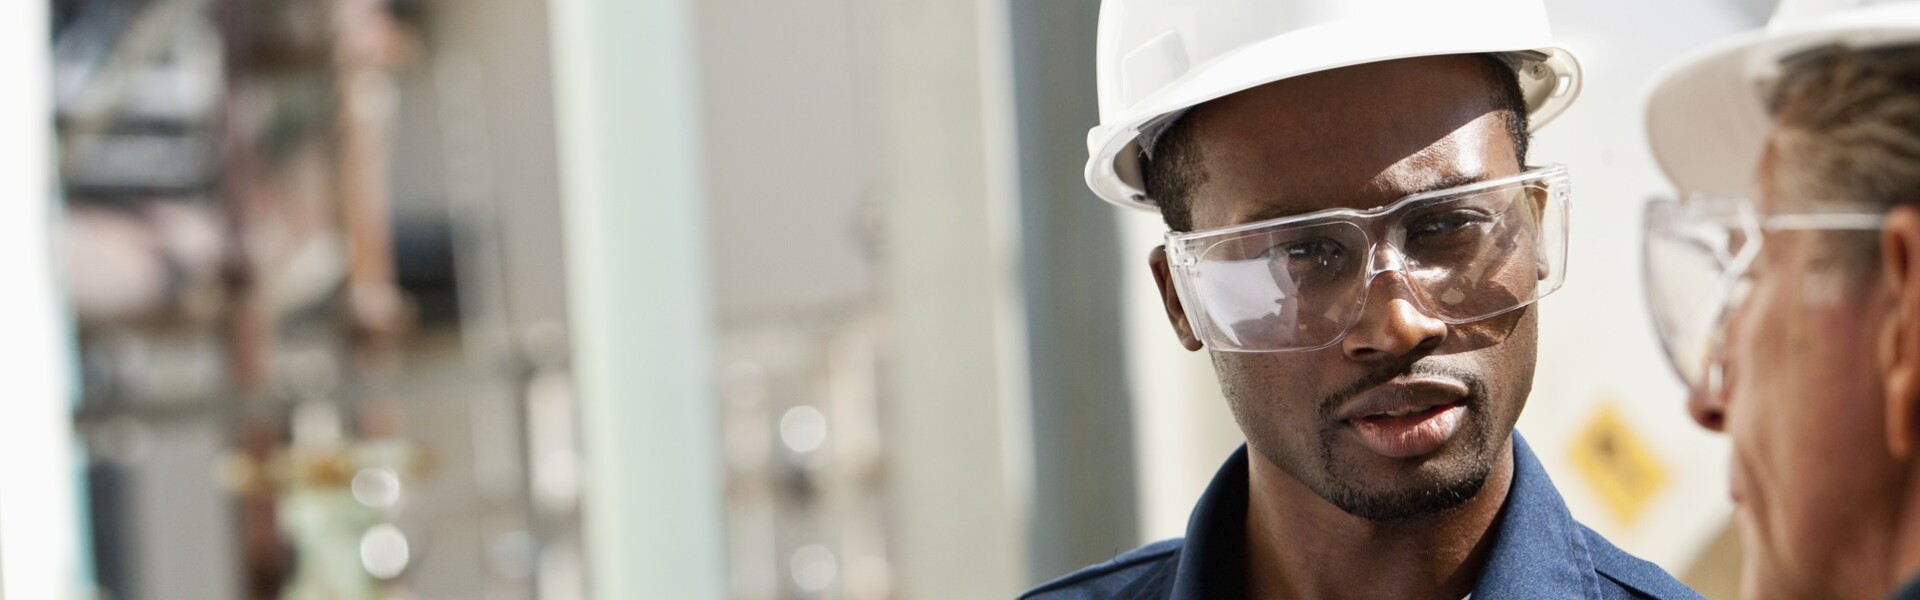 Hilti Group Measures Circularity with SAP Business Technology Platform